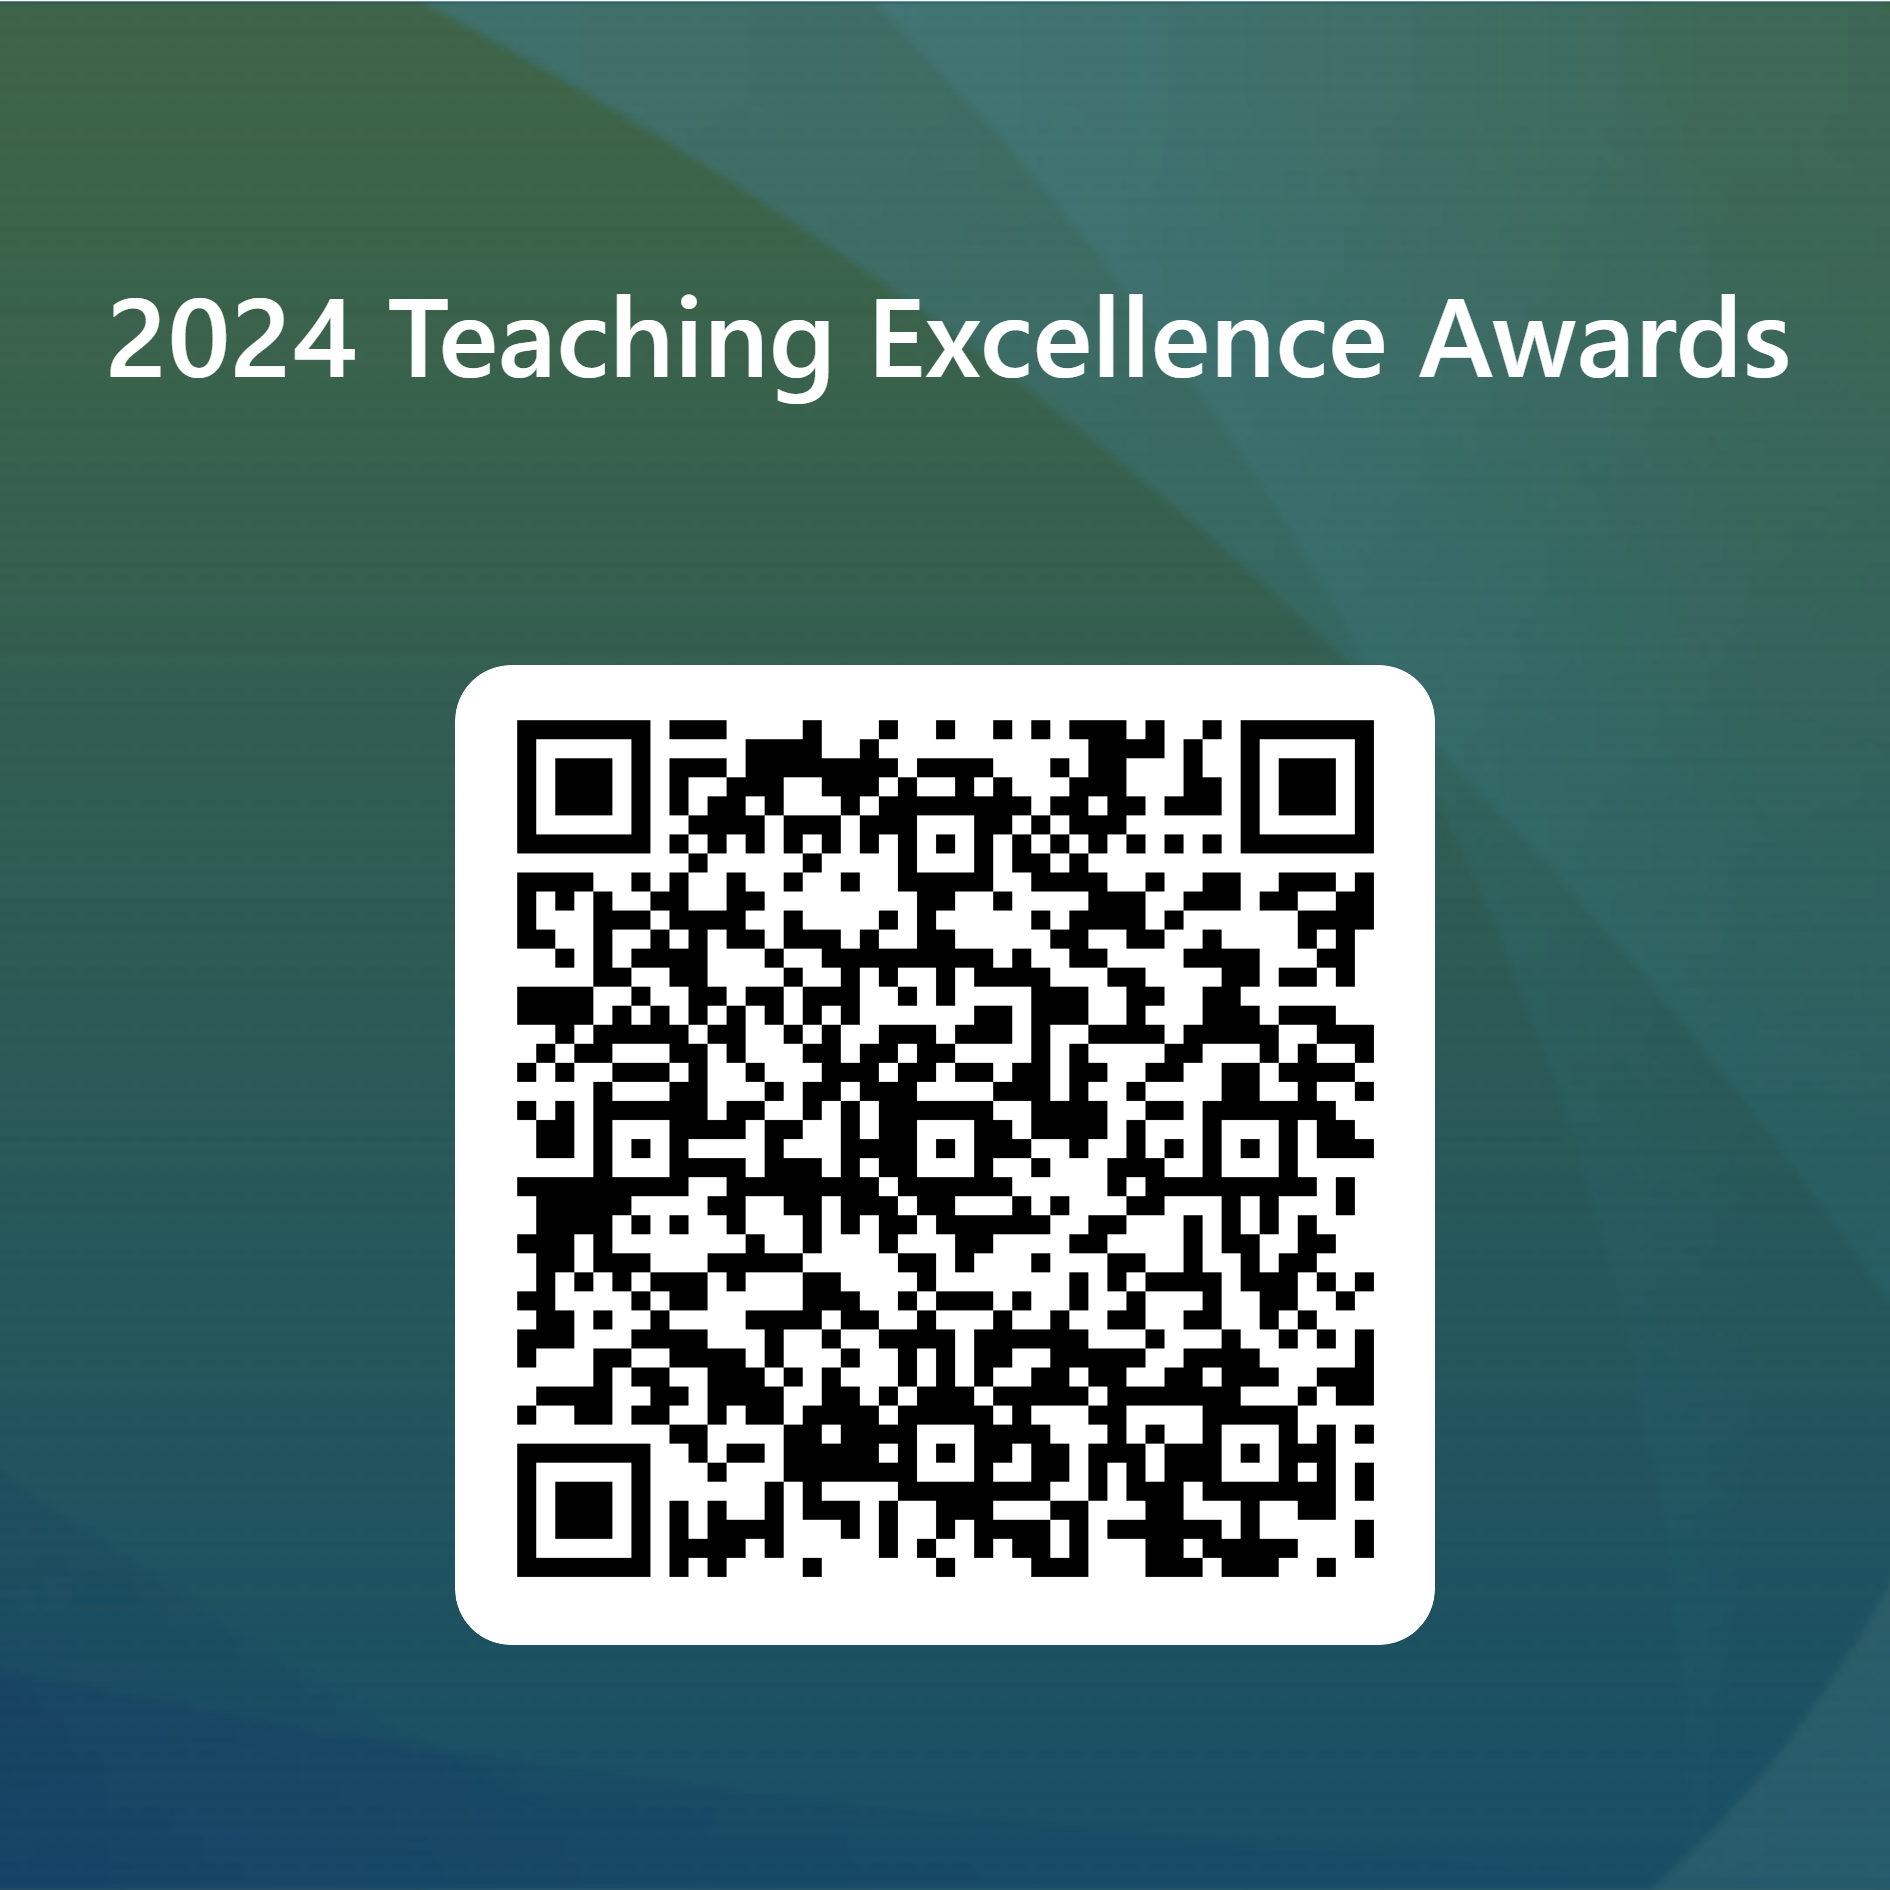 QR code for 2023 Teaching Excellence Awards nomination form.